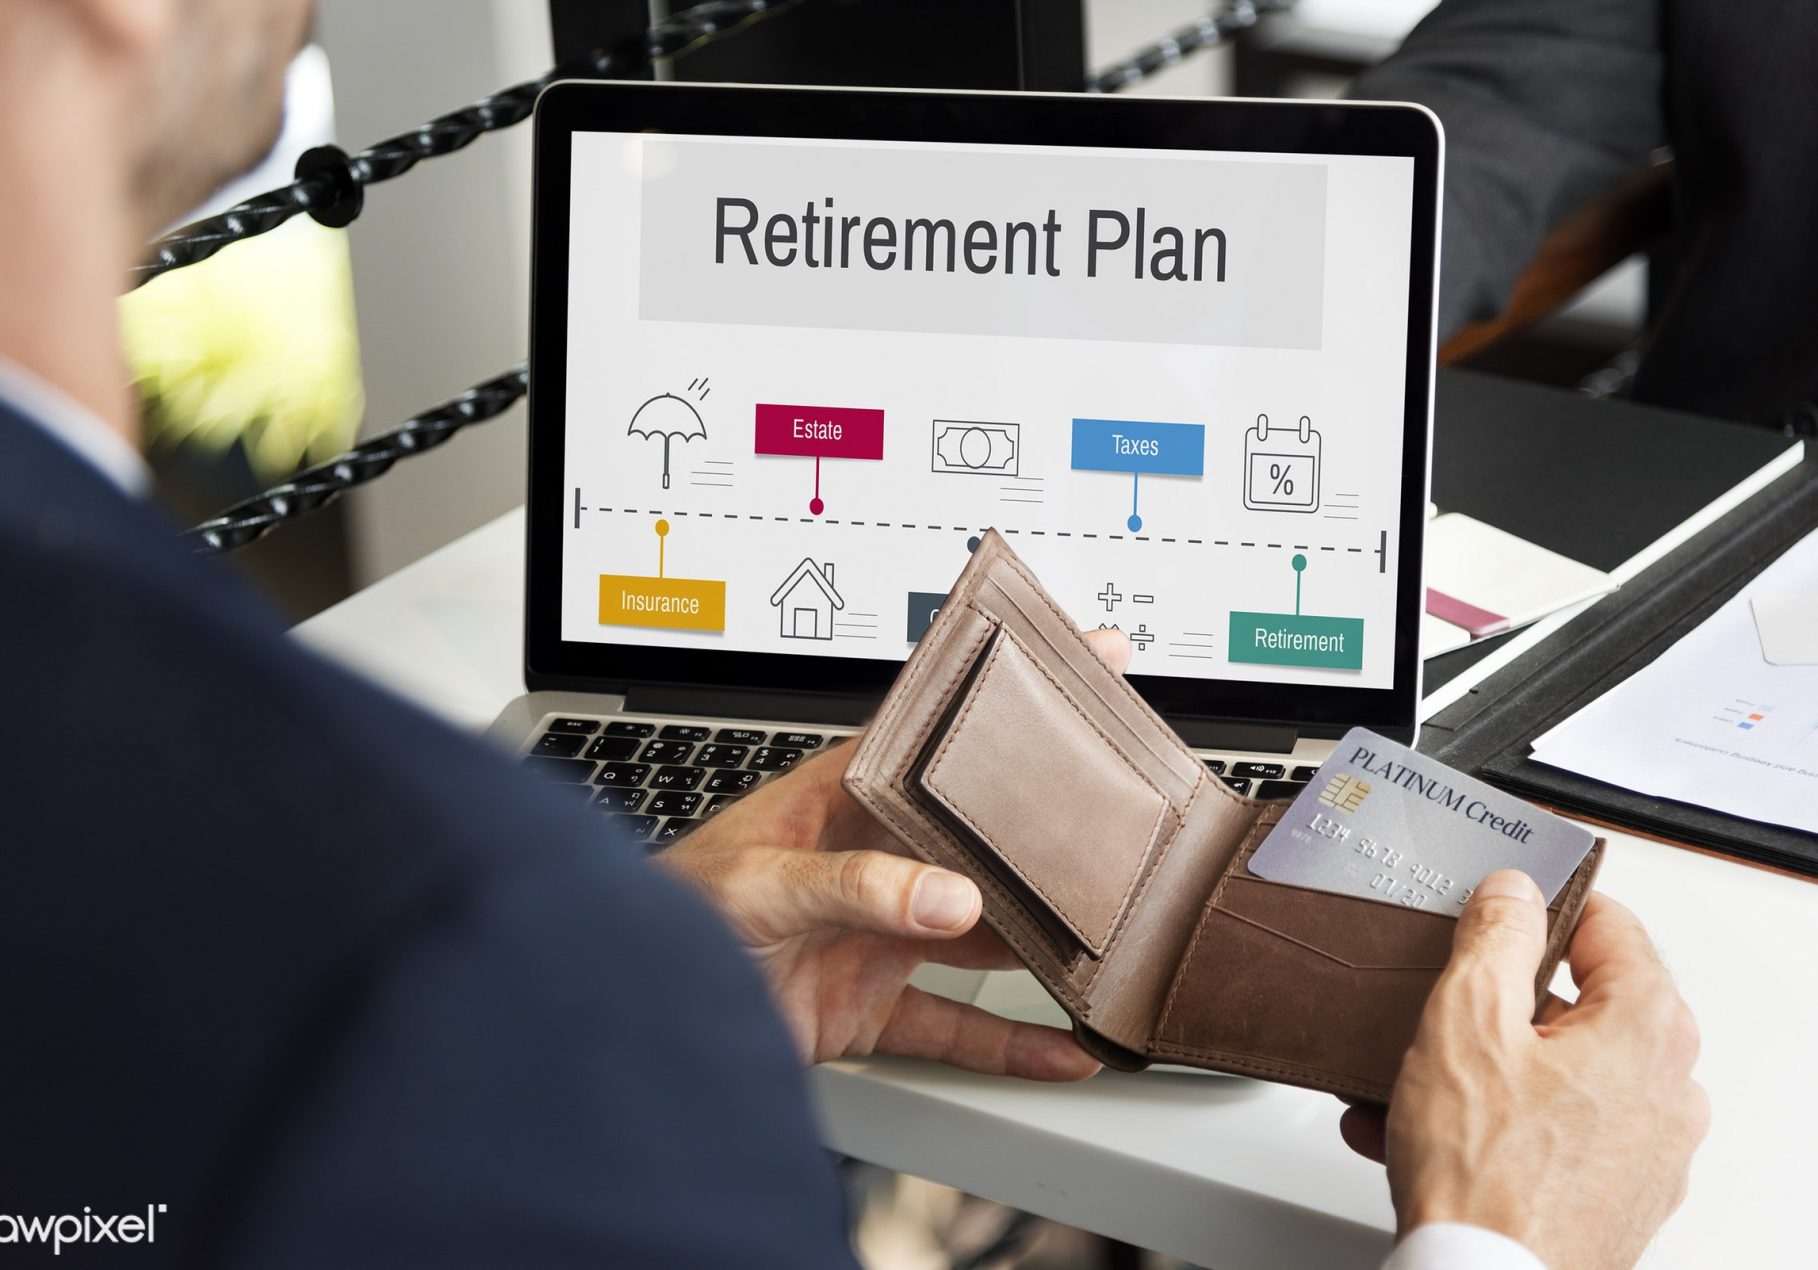 Is auto-enrolment helping people save for retirement